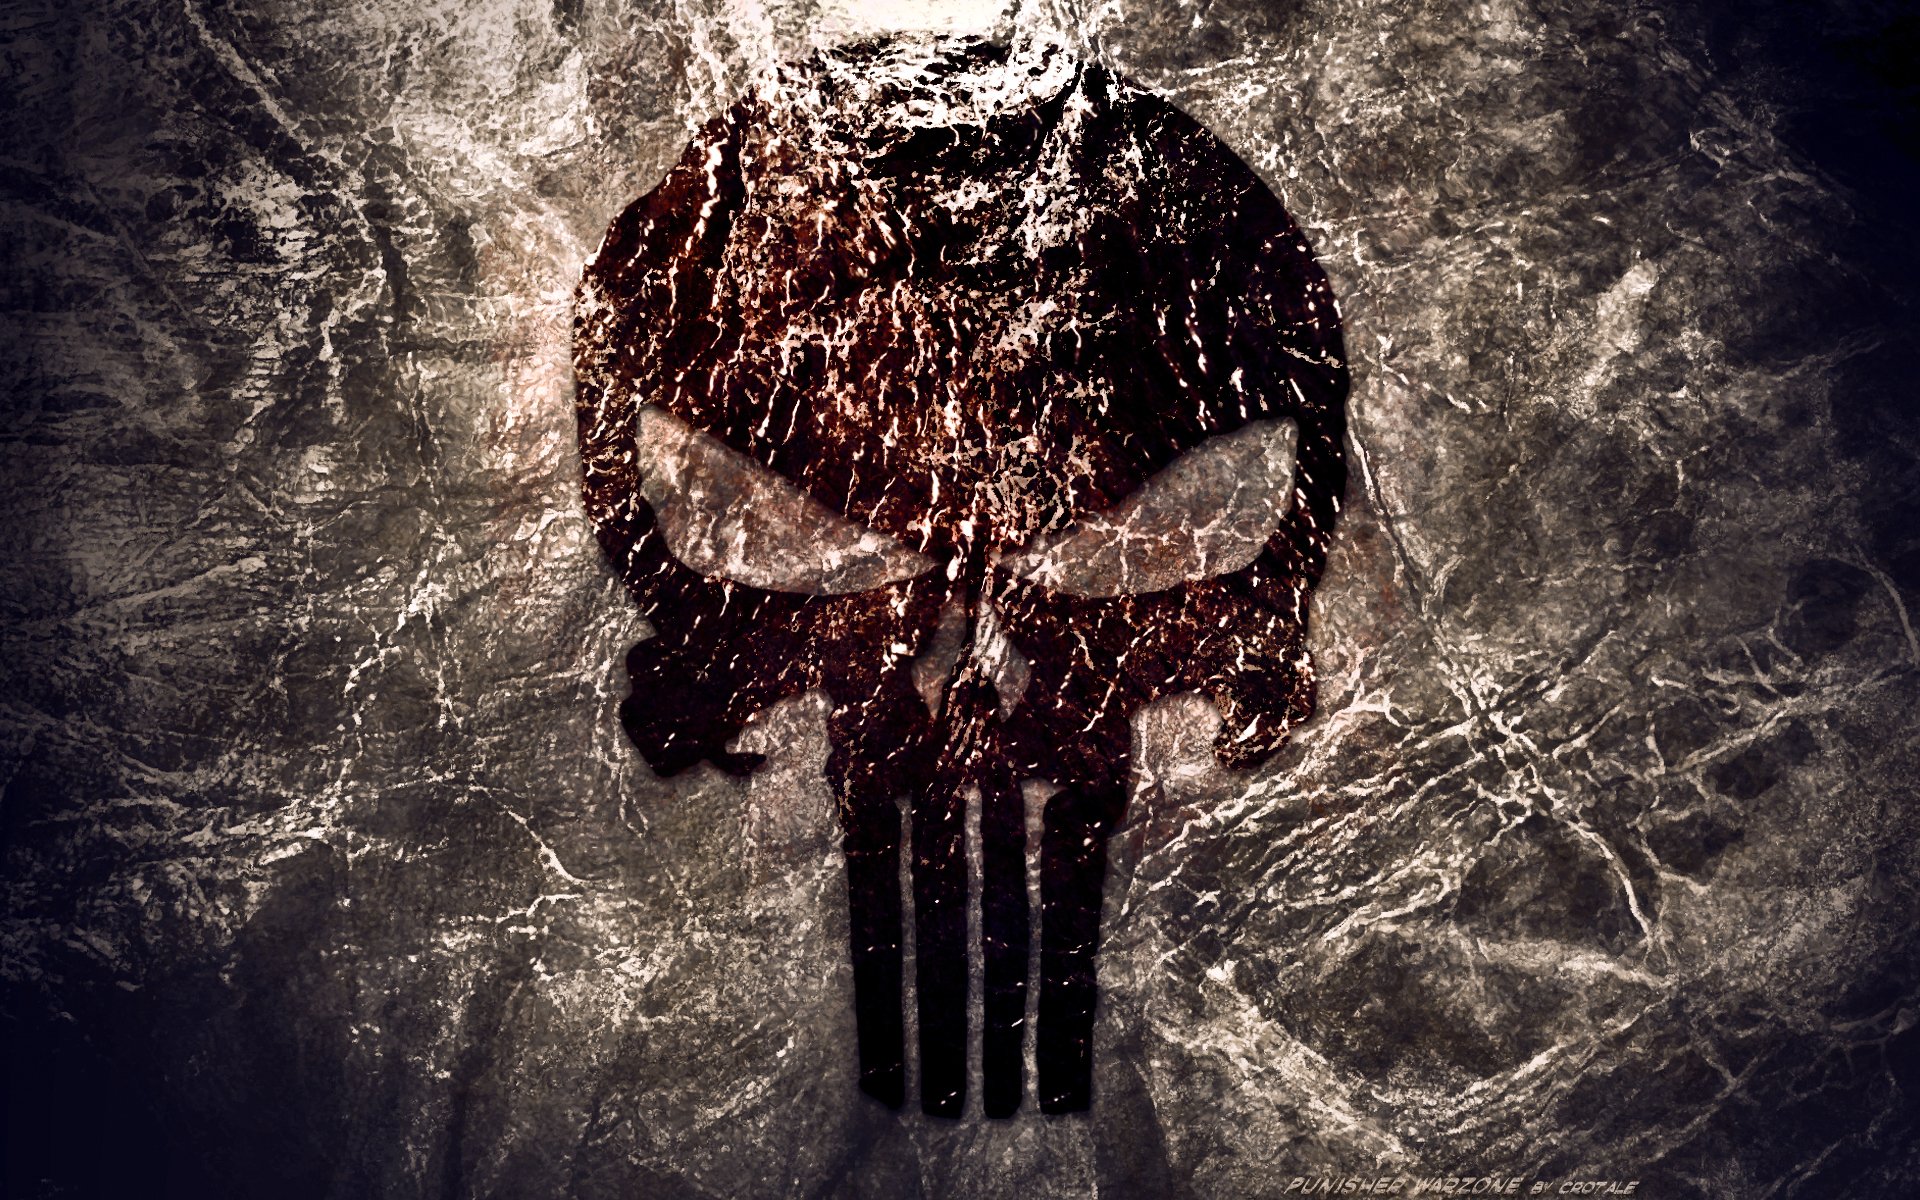 the punisher war zone, i acually used this as a wallpaper